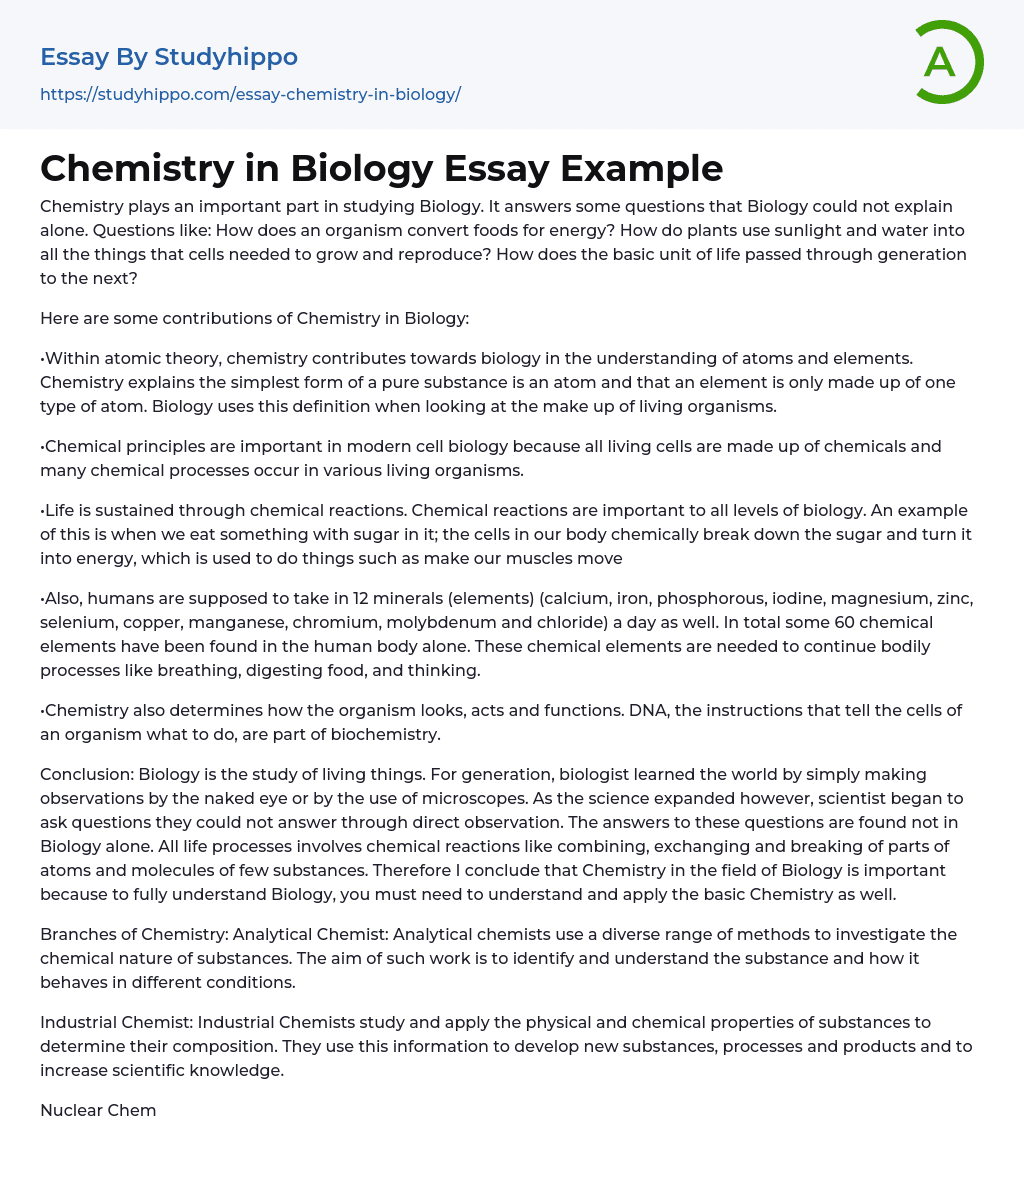 Chemistry in Biology Essay Example